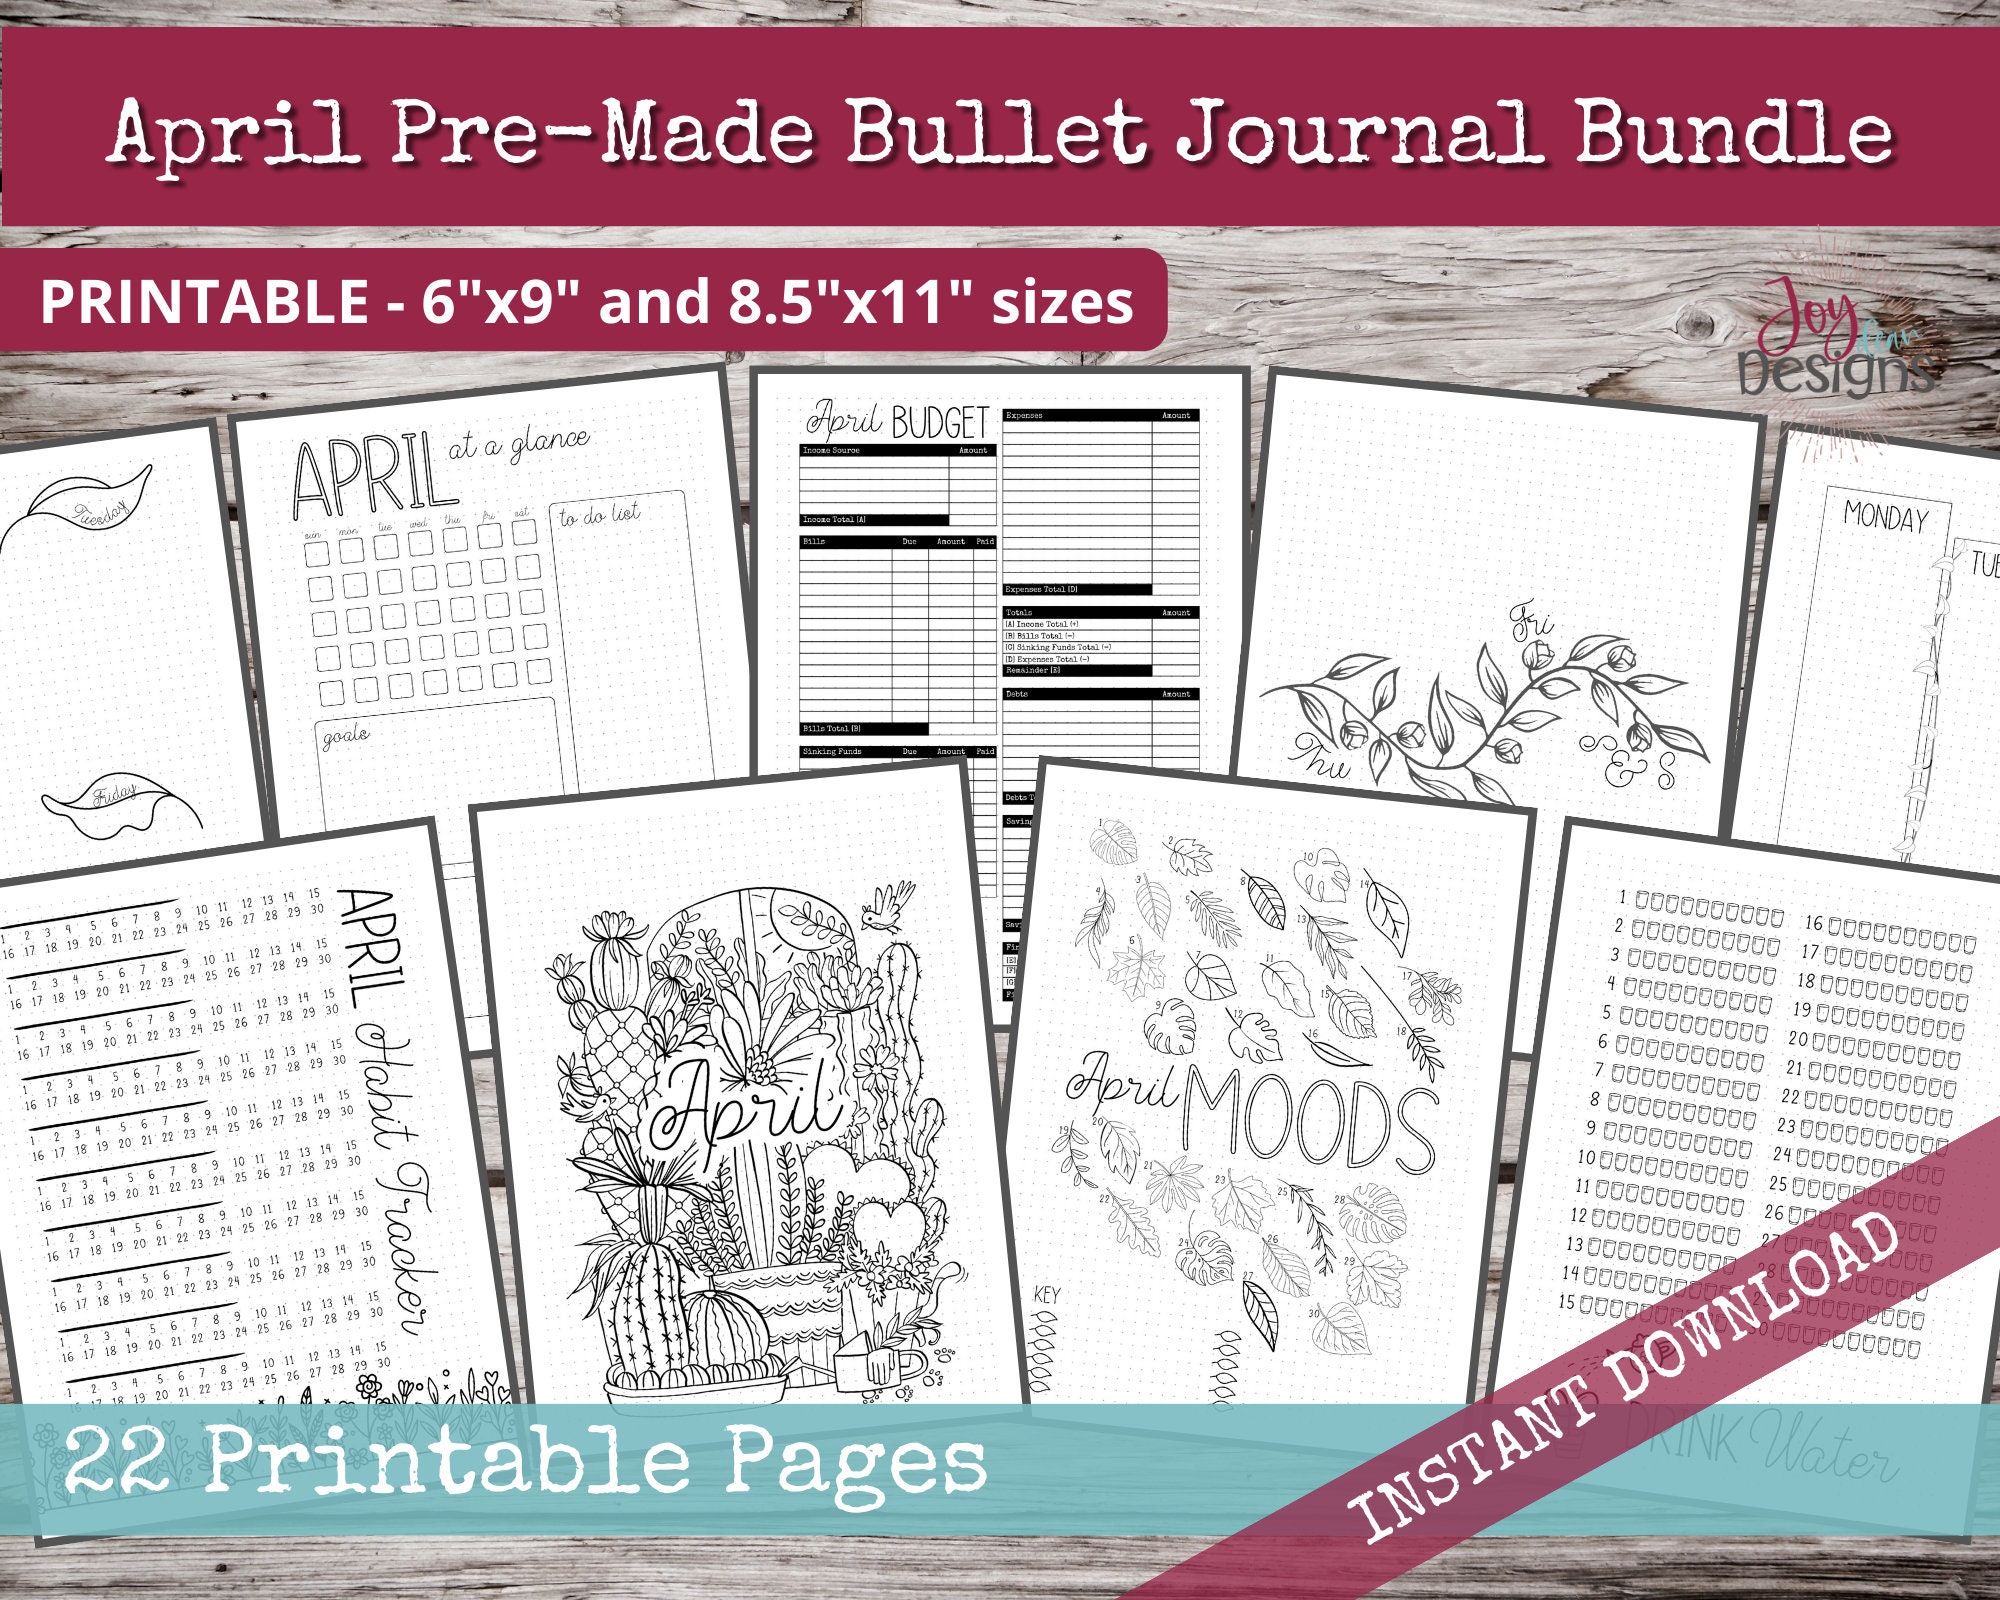 Premade Bullet Journal - made to order!